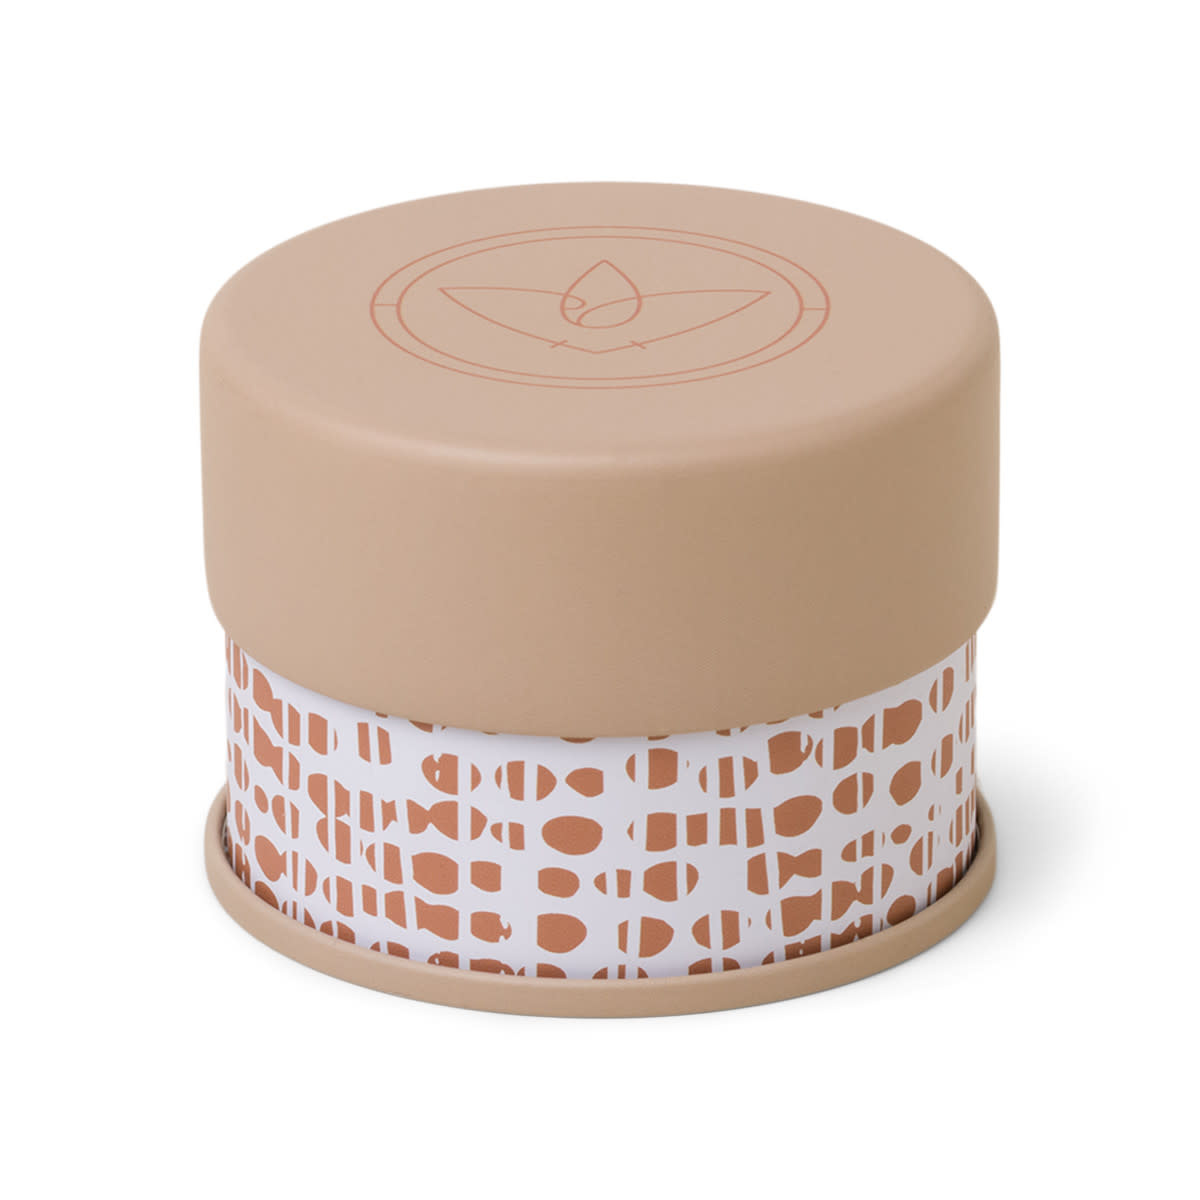 paddywax Terrace Patterned Candle Tin with Terracotta Solid Lid, Linen Rosewood